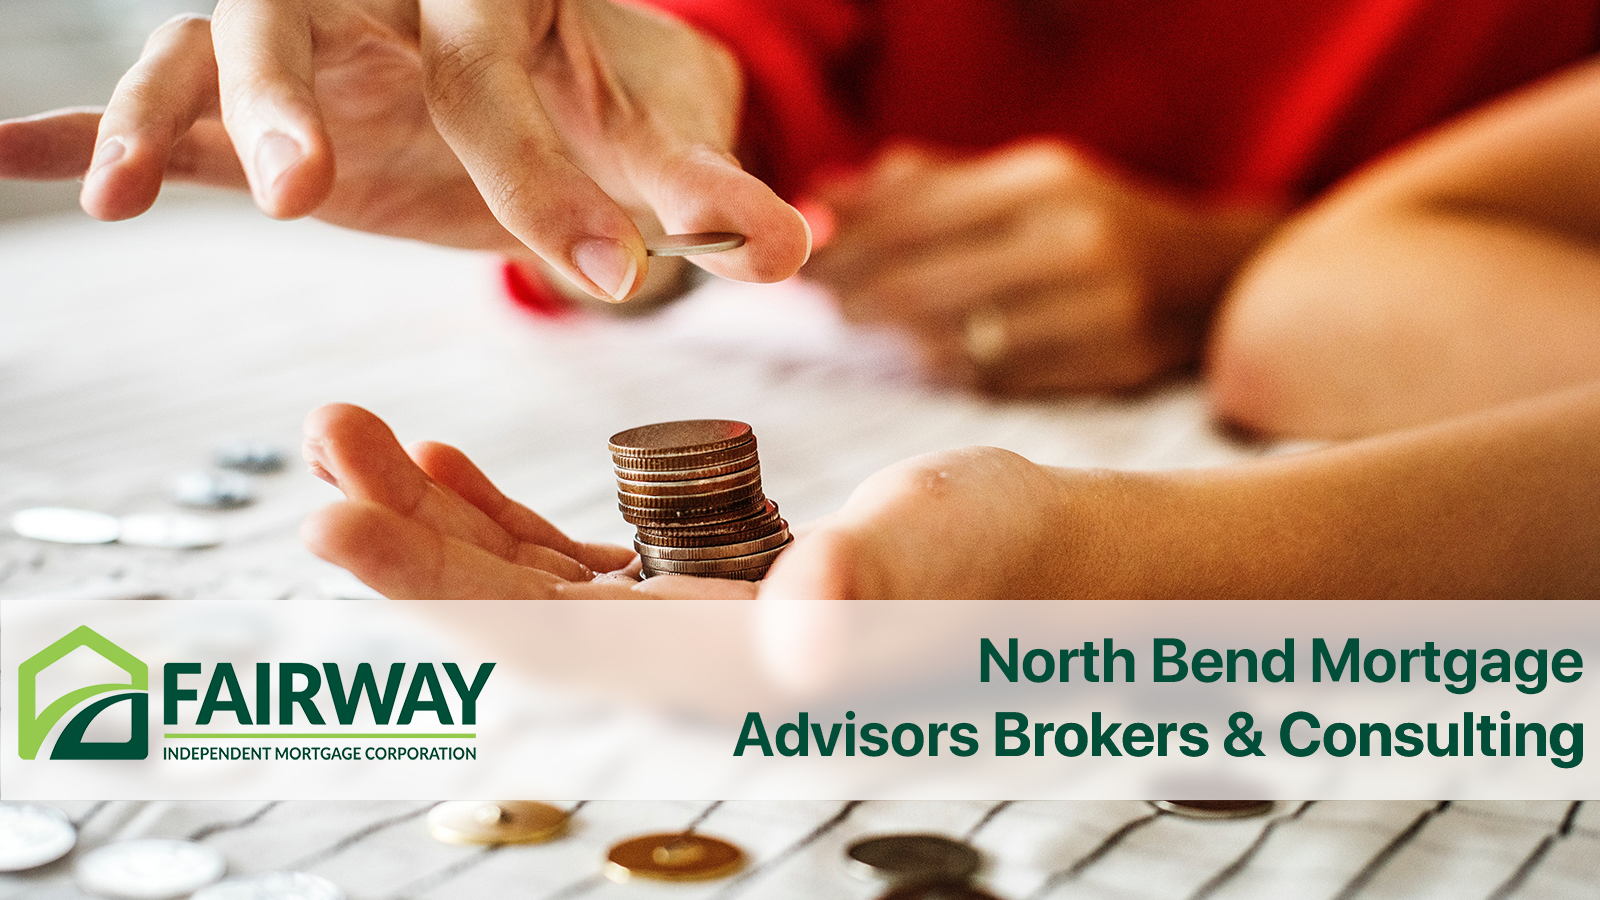 North-Bend-Mortgage-Advisors-Brokers-Consulting